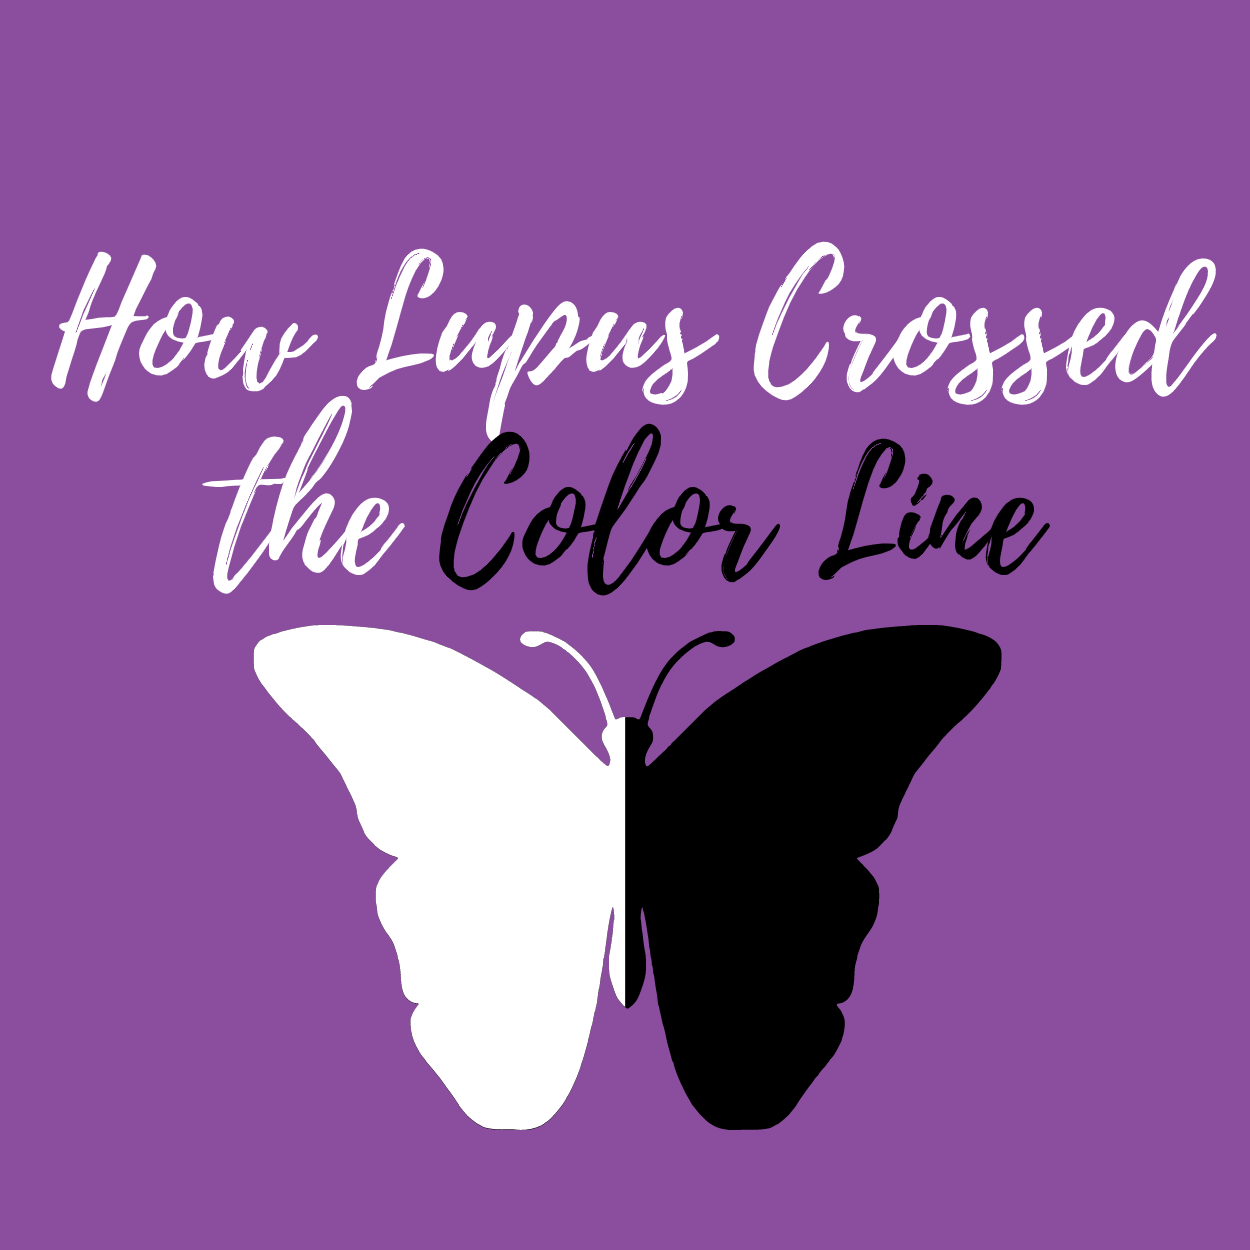 graphic of black and white butterfly reading "how lupus crossed the color line" on purple background